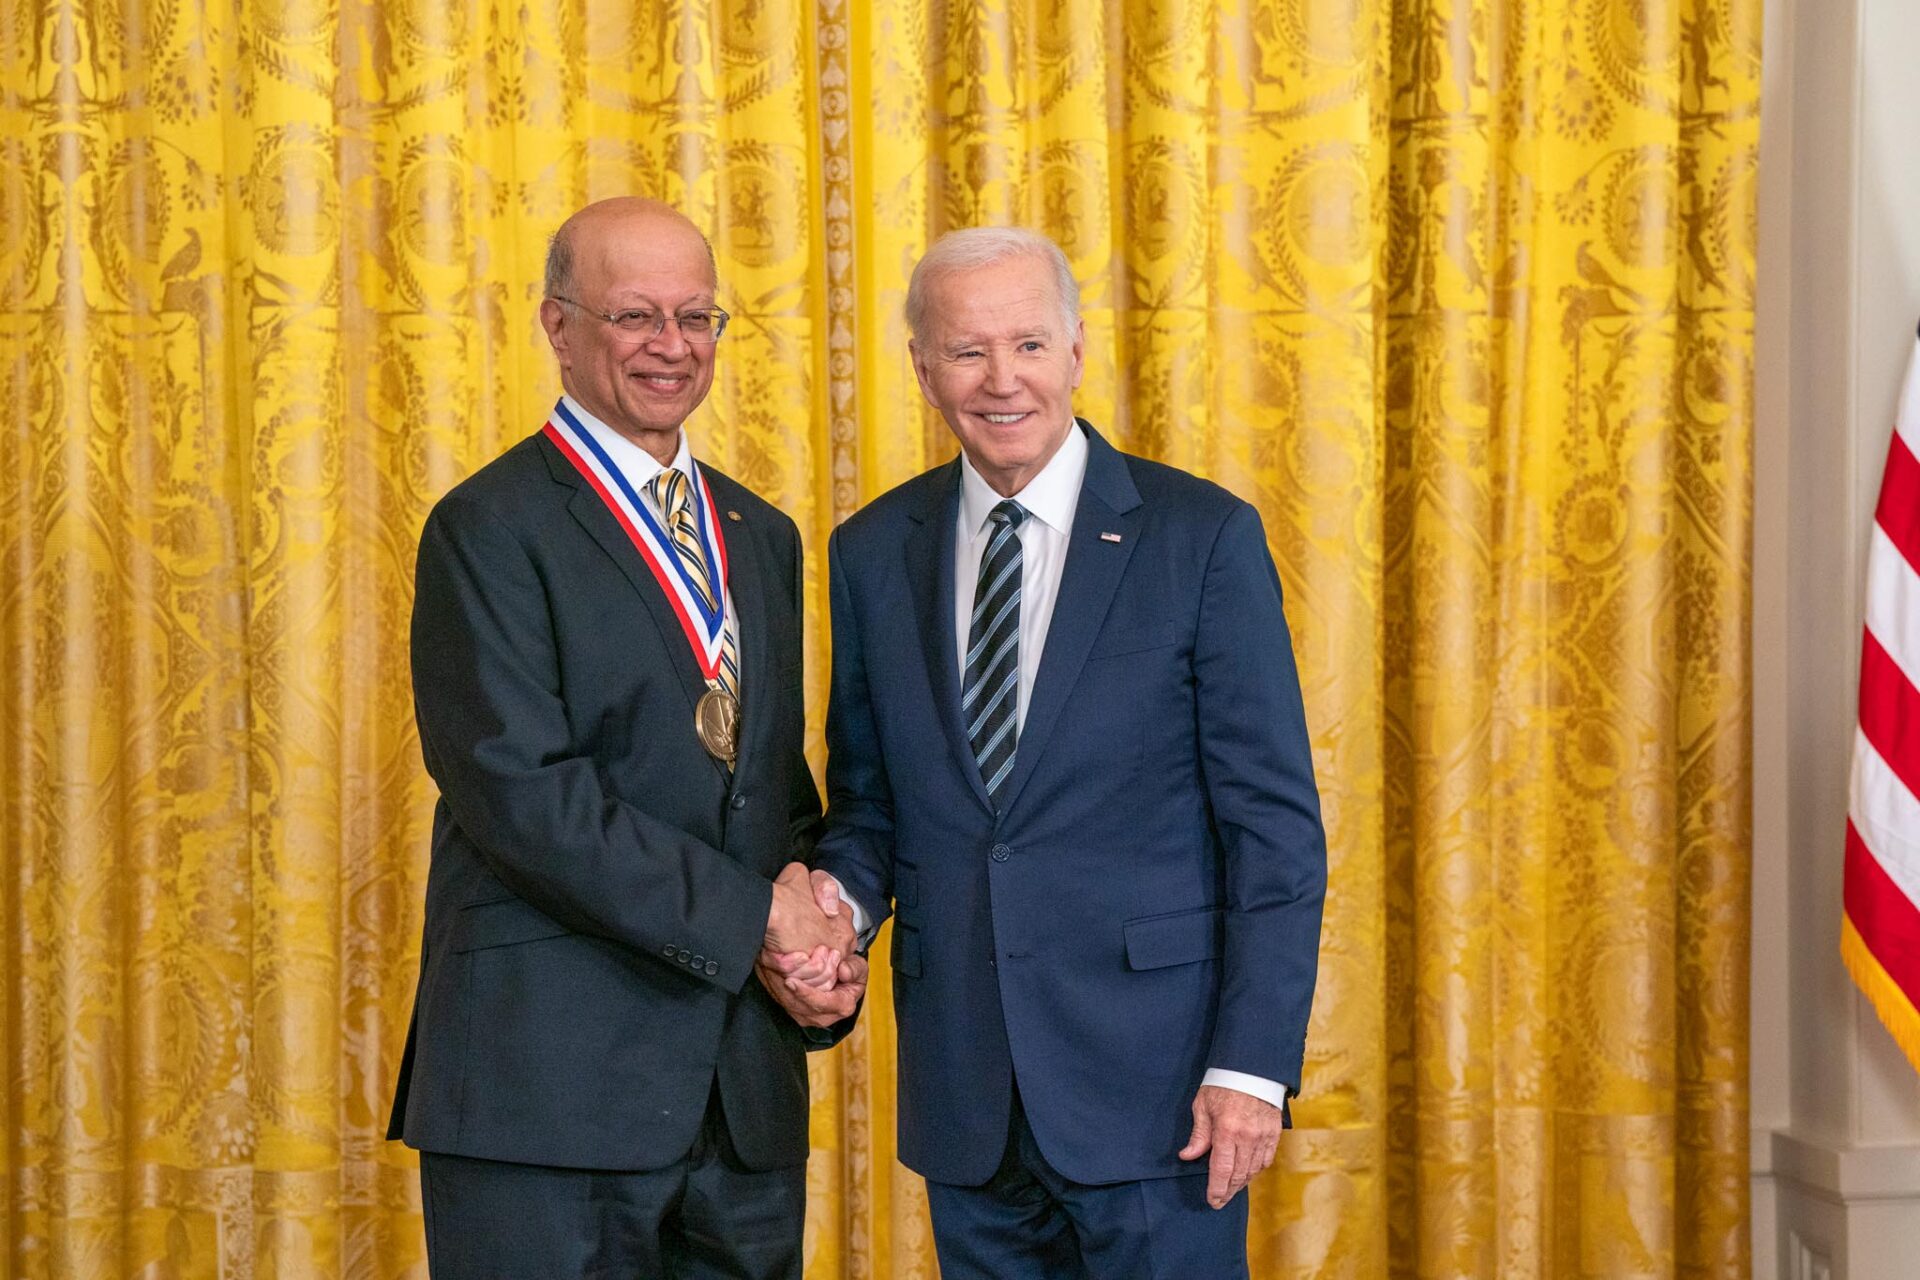 President Biden awards Ashok Gadgil the National Medal of Technology and Innovation during an awards ceremony in the East Room of The White House, Oct. 24, 2023. Photo by Ryan K. Morris